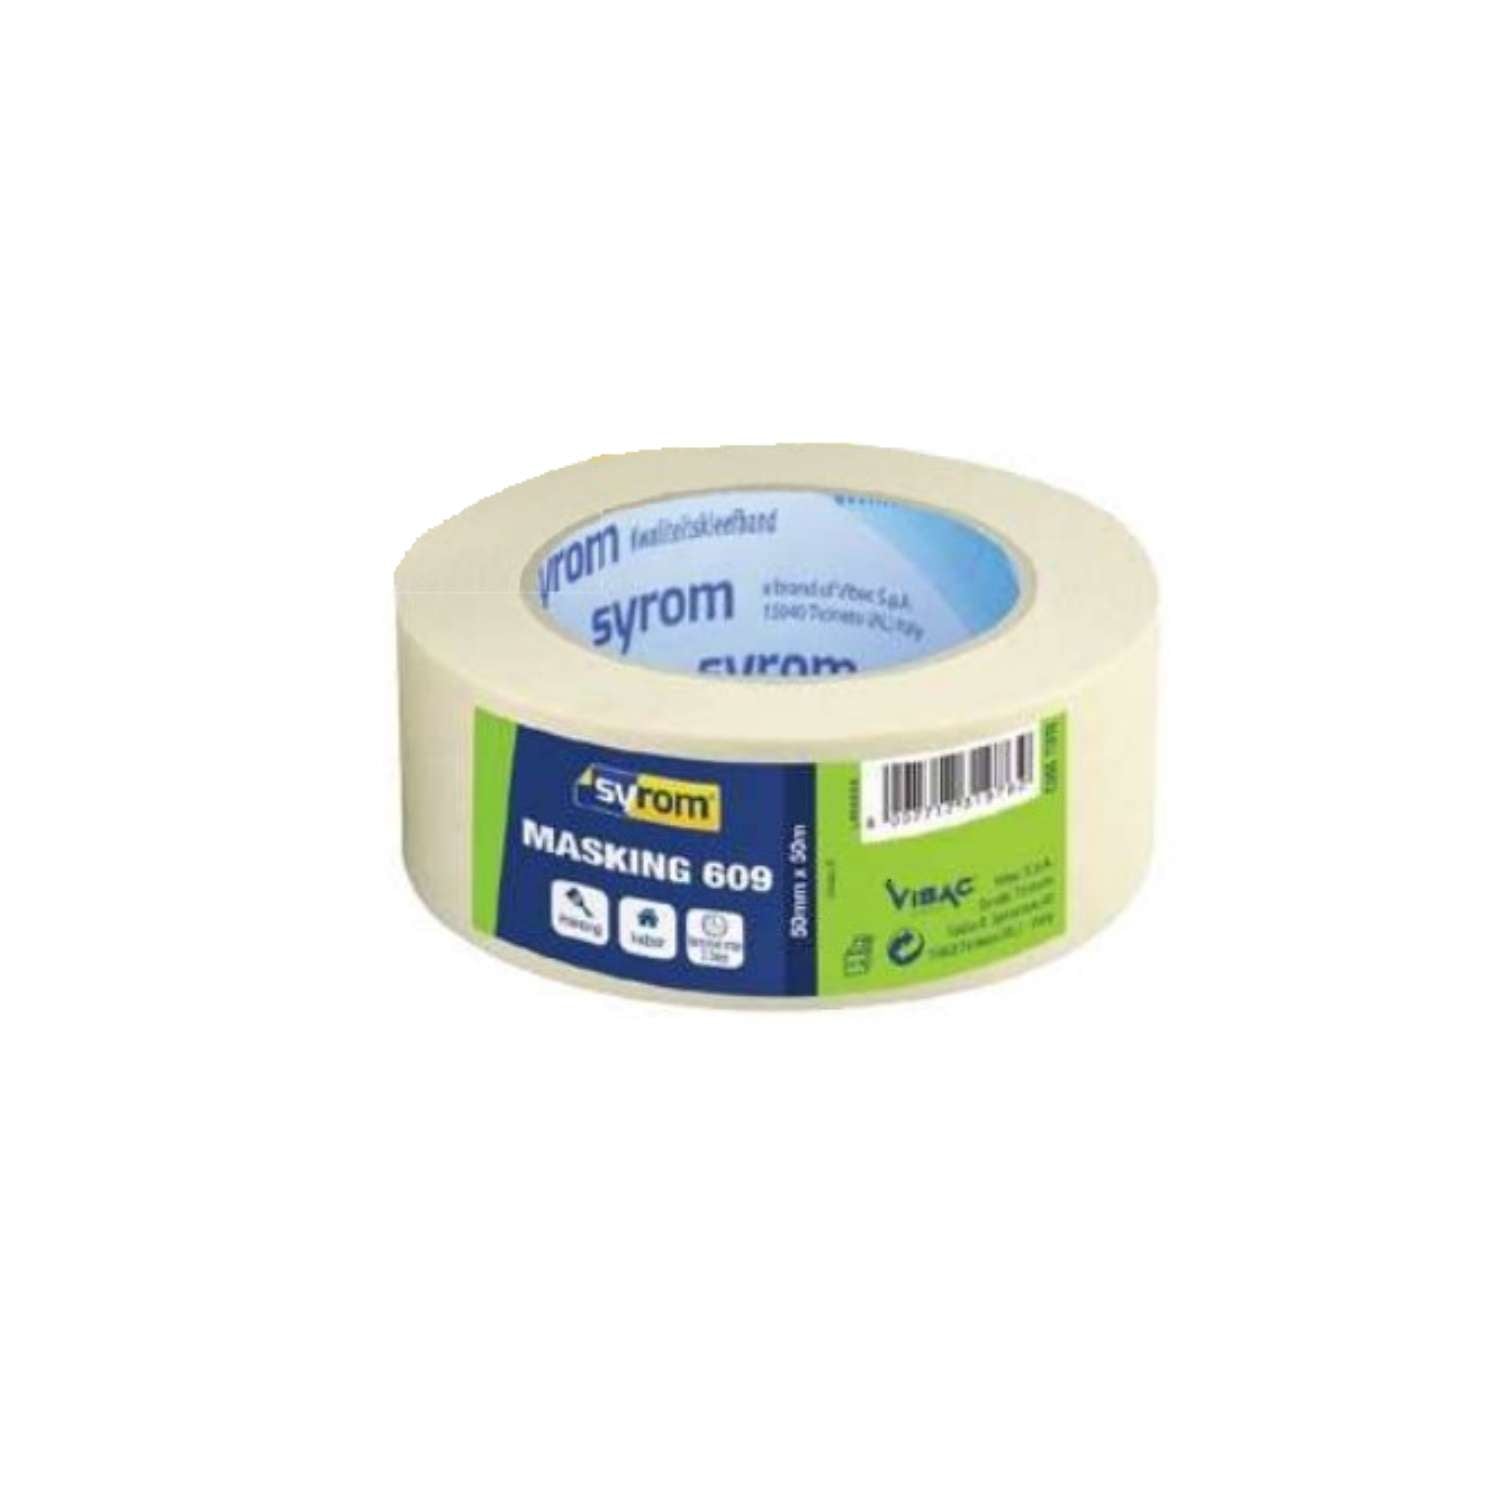 Masking paper tape 609 ivory and yellow 45mt x 50mm - Syrom 11693